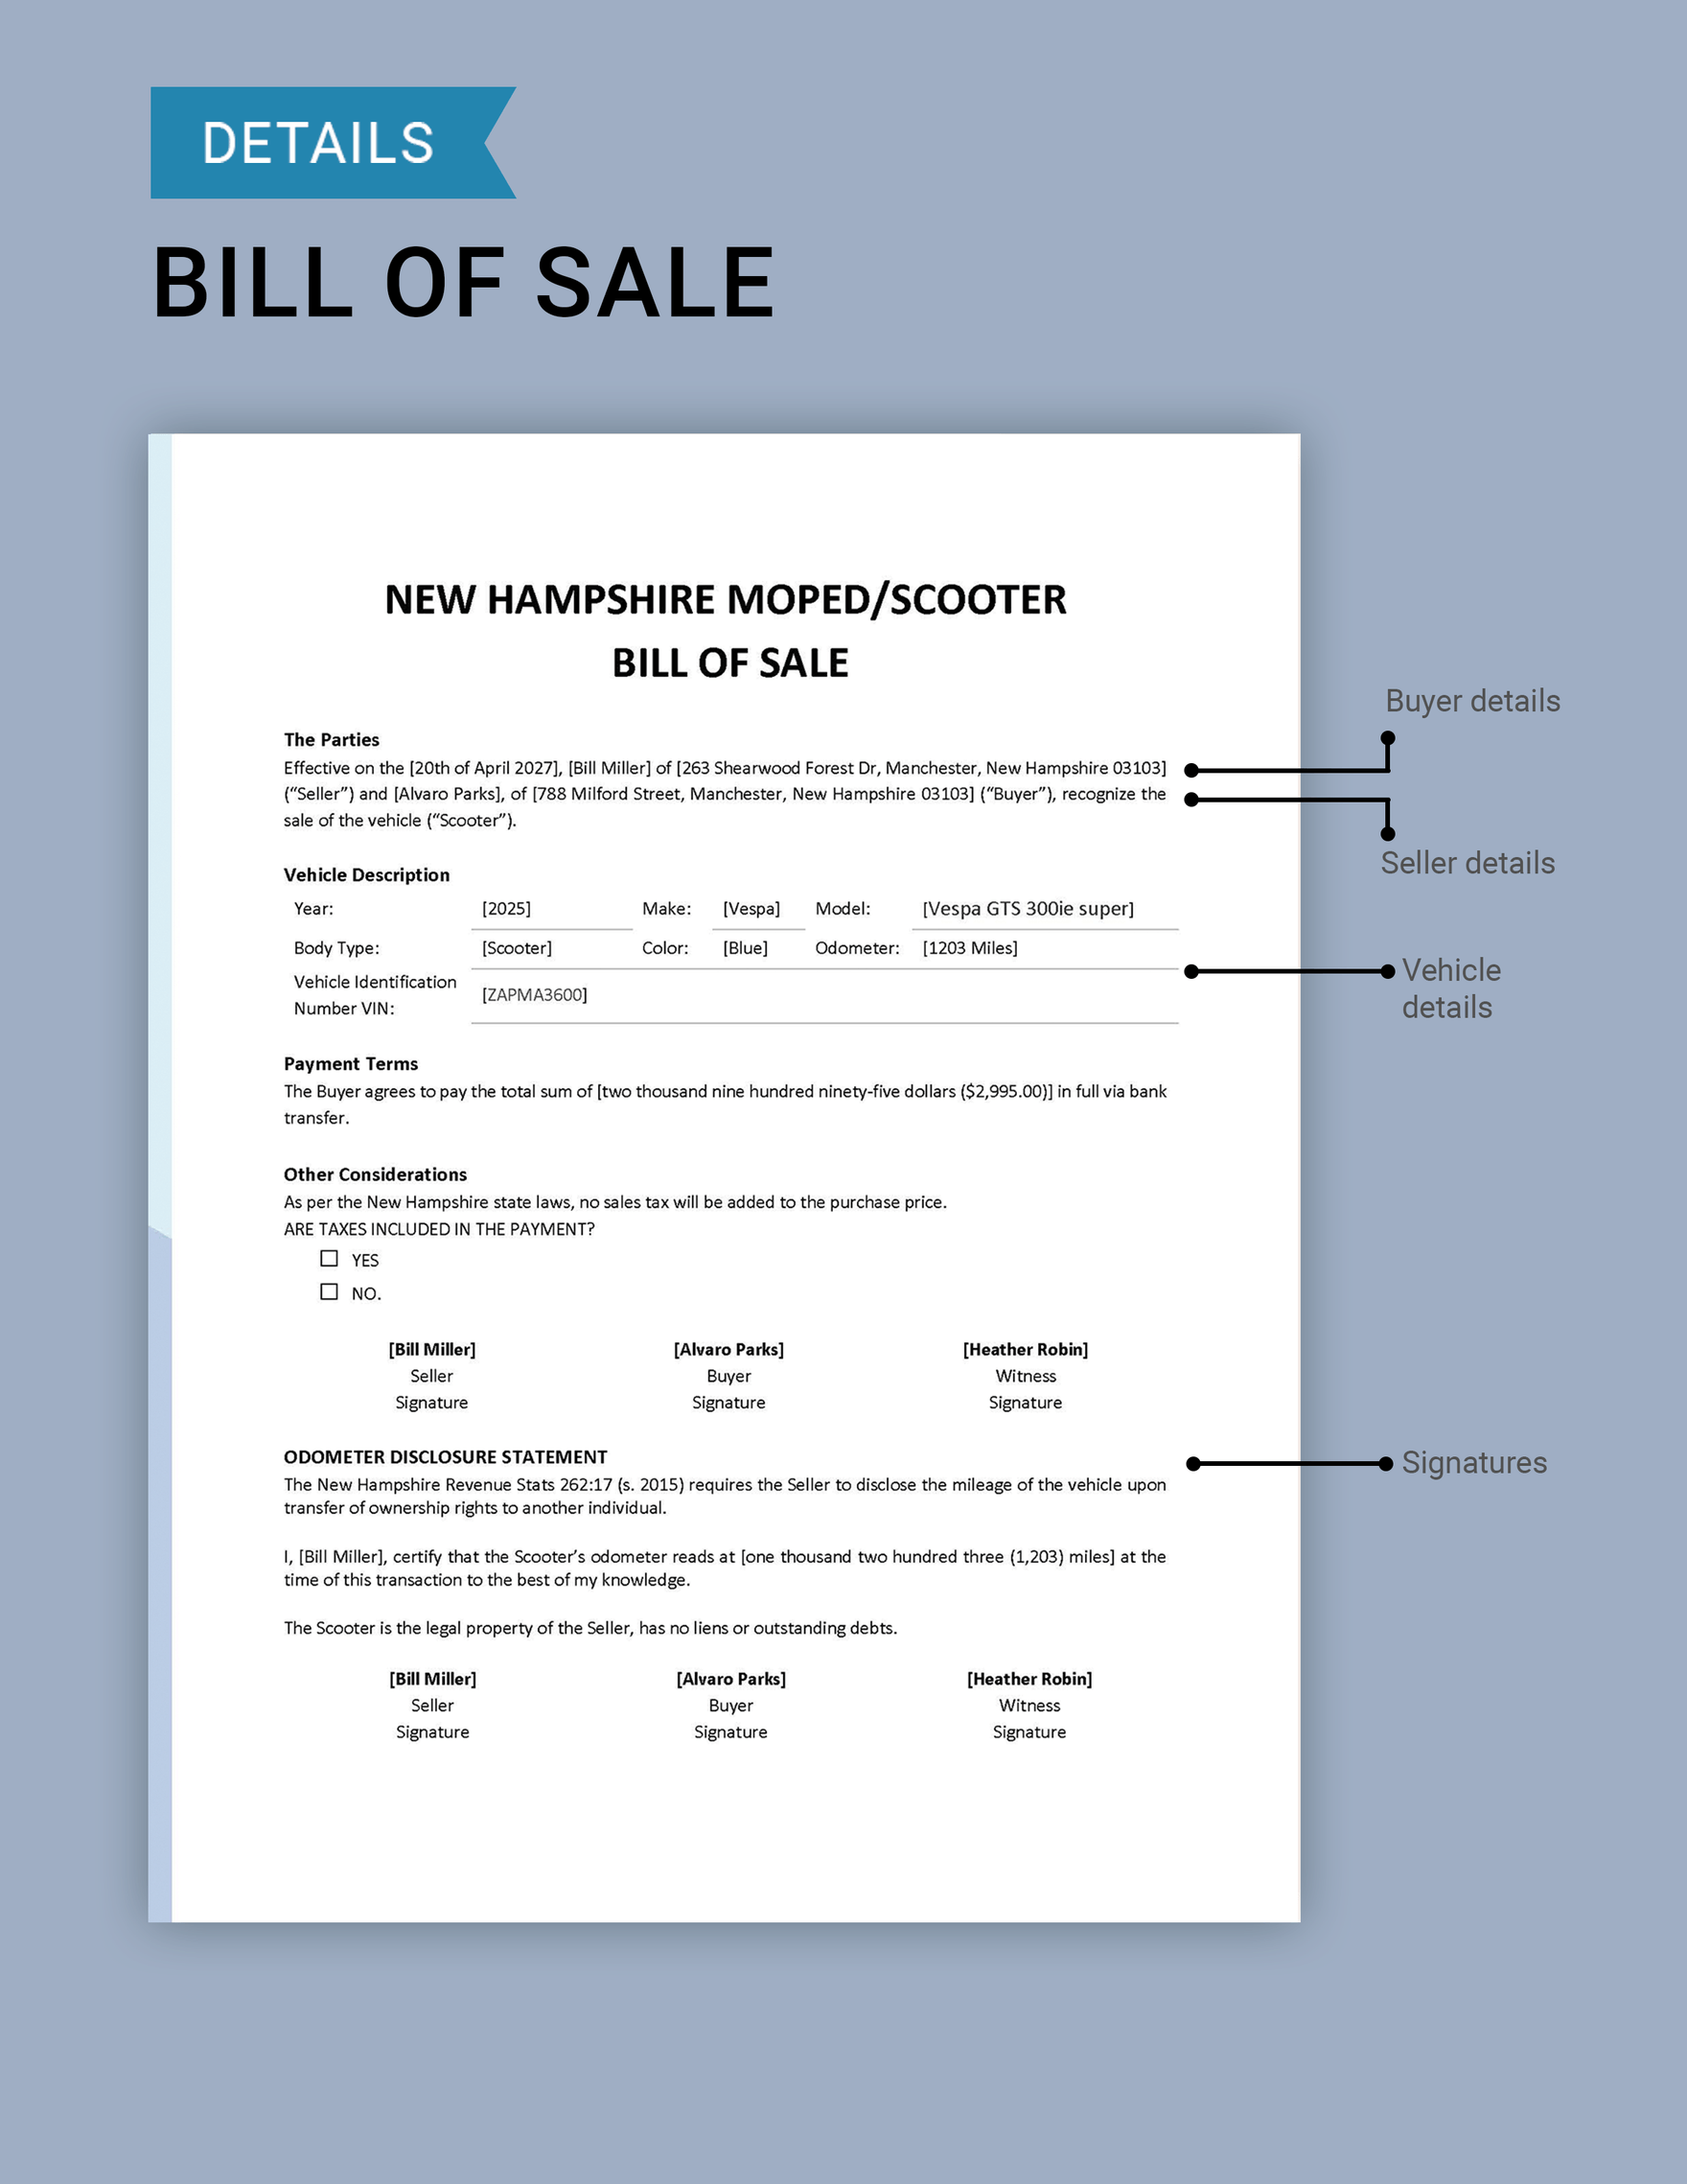 New Hampshire Moped / Scooter Bill of Sale Form Template